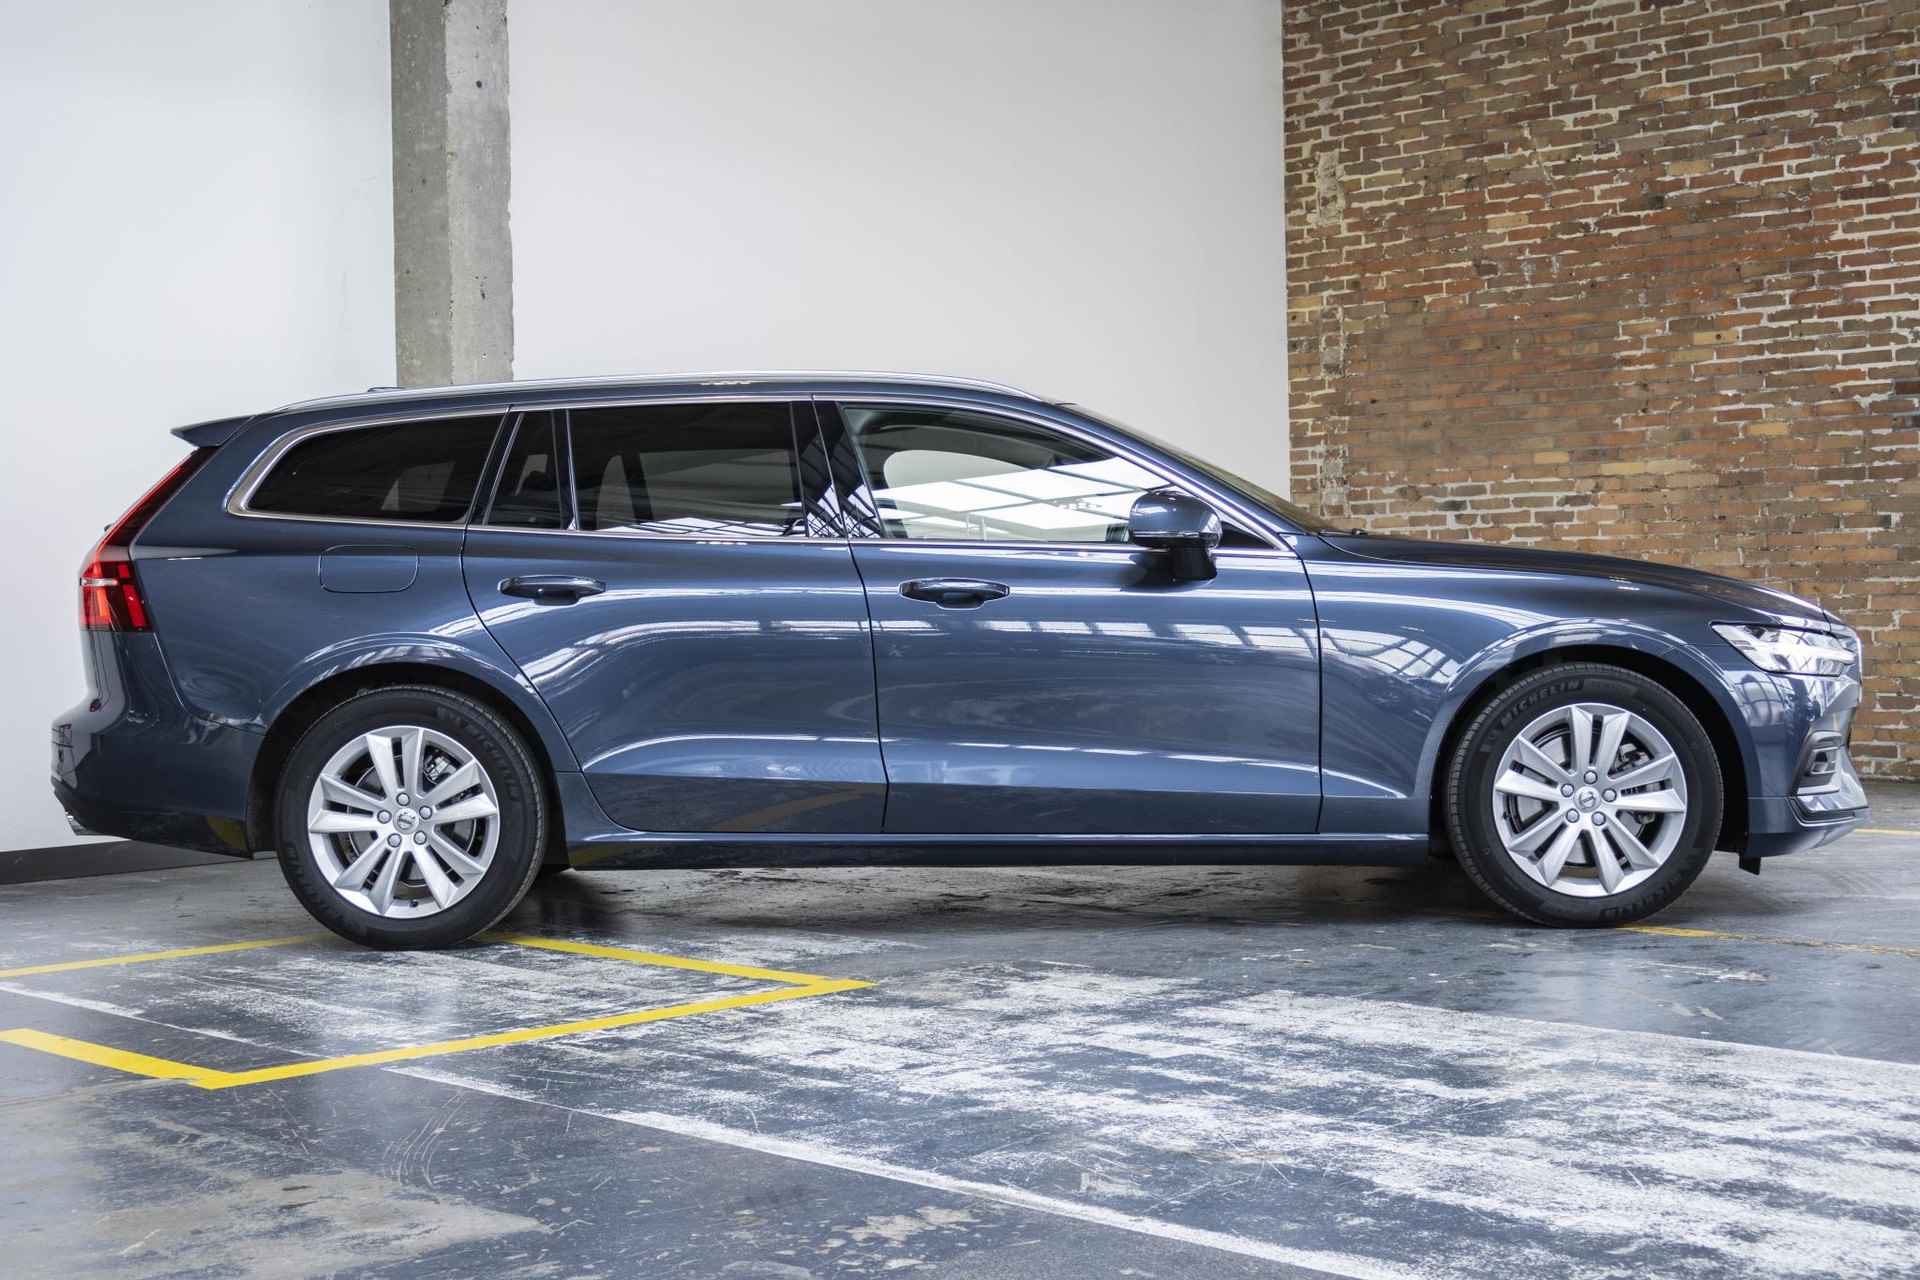 Volvo V60 B4 Automaat Business Pro | Blind Spot | Parkeercamera | Park Assist voor en achter | Adaptive cruise control | Extra getint glas | Keyless entree - 11/40